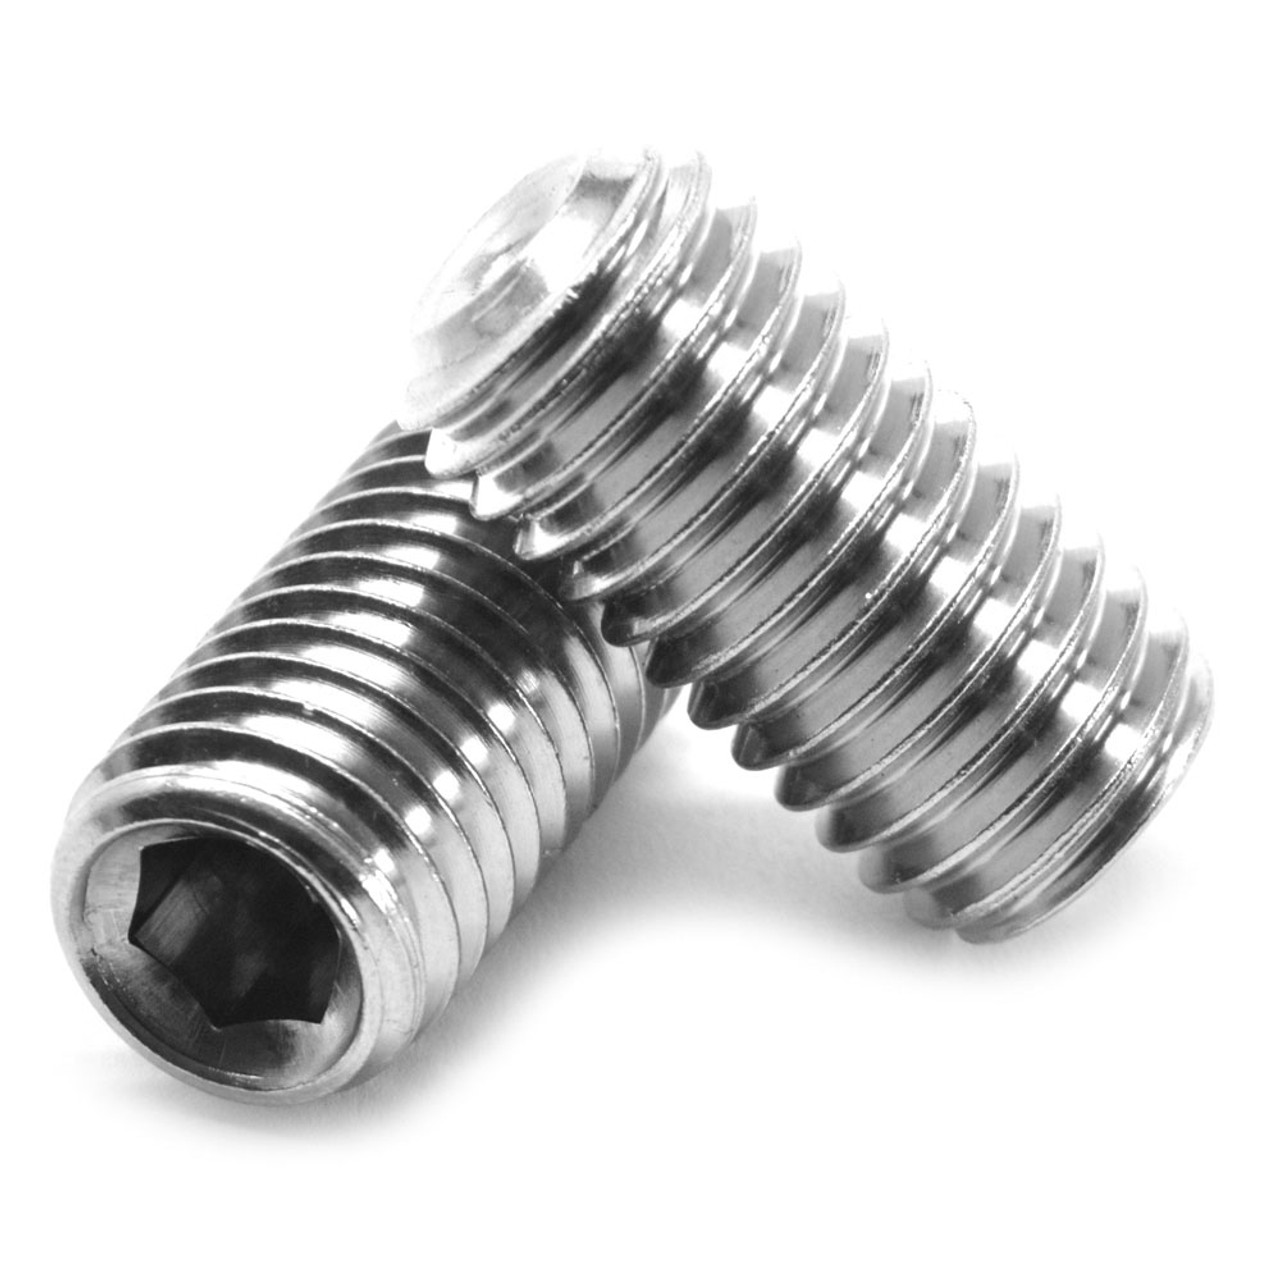 M6 x 1.00 x 20 MM Coarse Thread DIN 916 / ISO 4029 Socket Set Screw Cup Point Stainless Steel 316